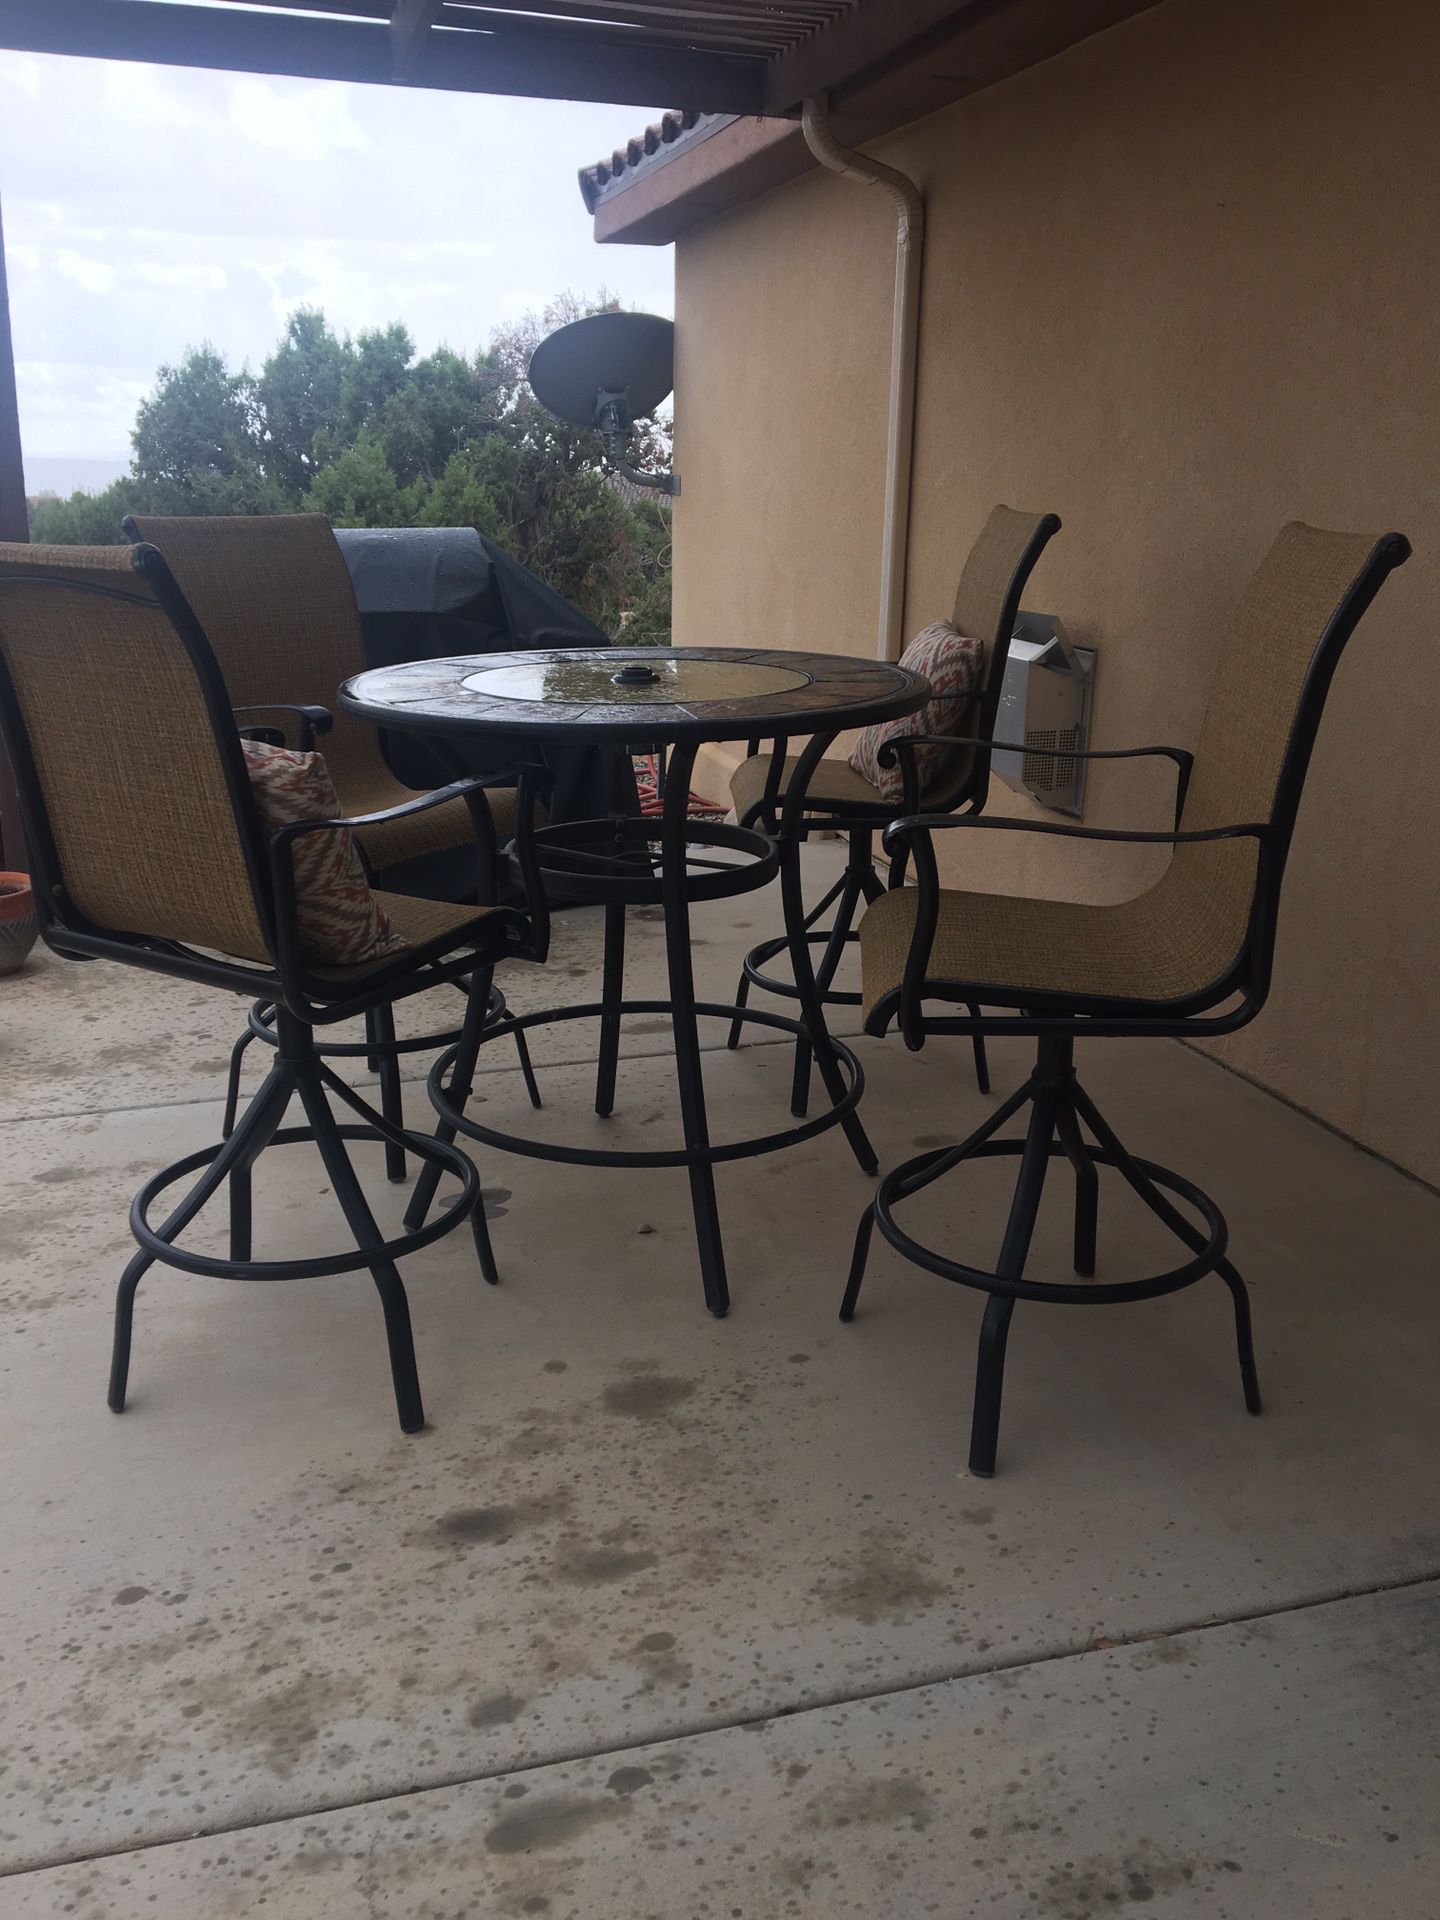 Patio set with 4 chairs (missing glass top)